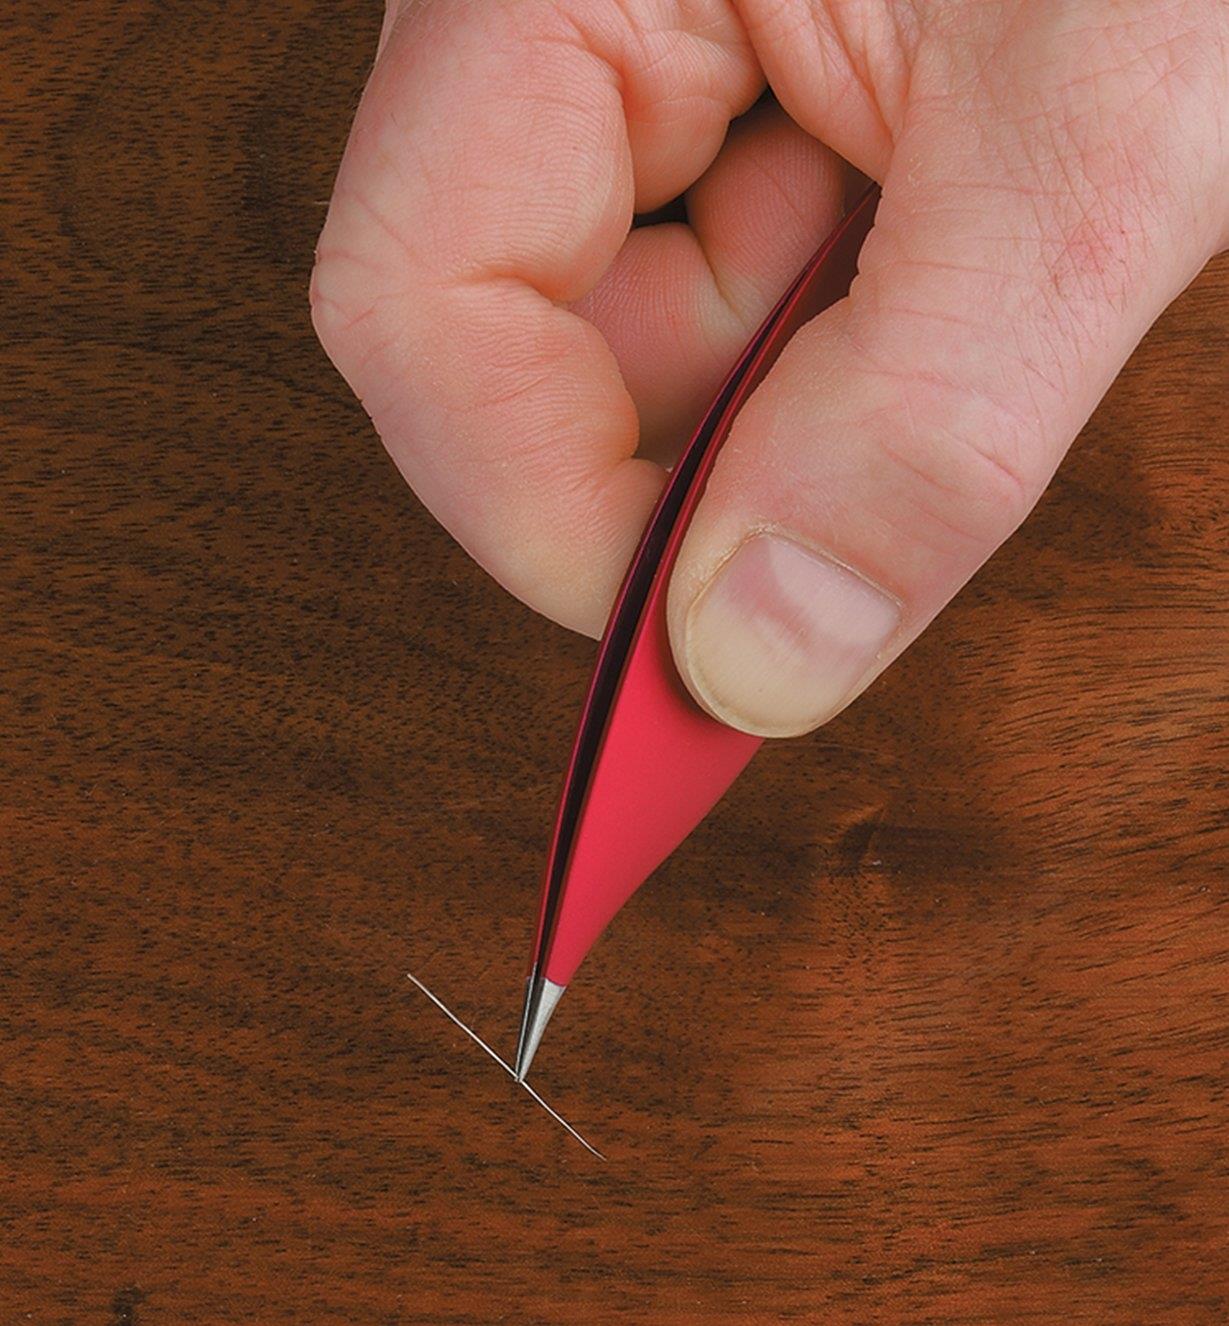 Picking up a sewing needle with Micro-Tip Tweezers